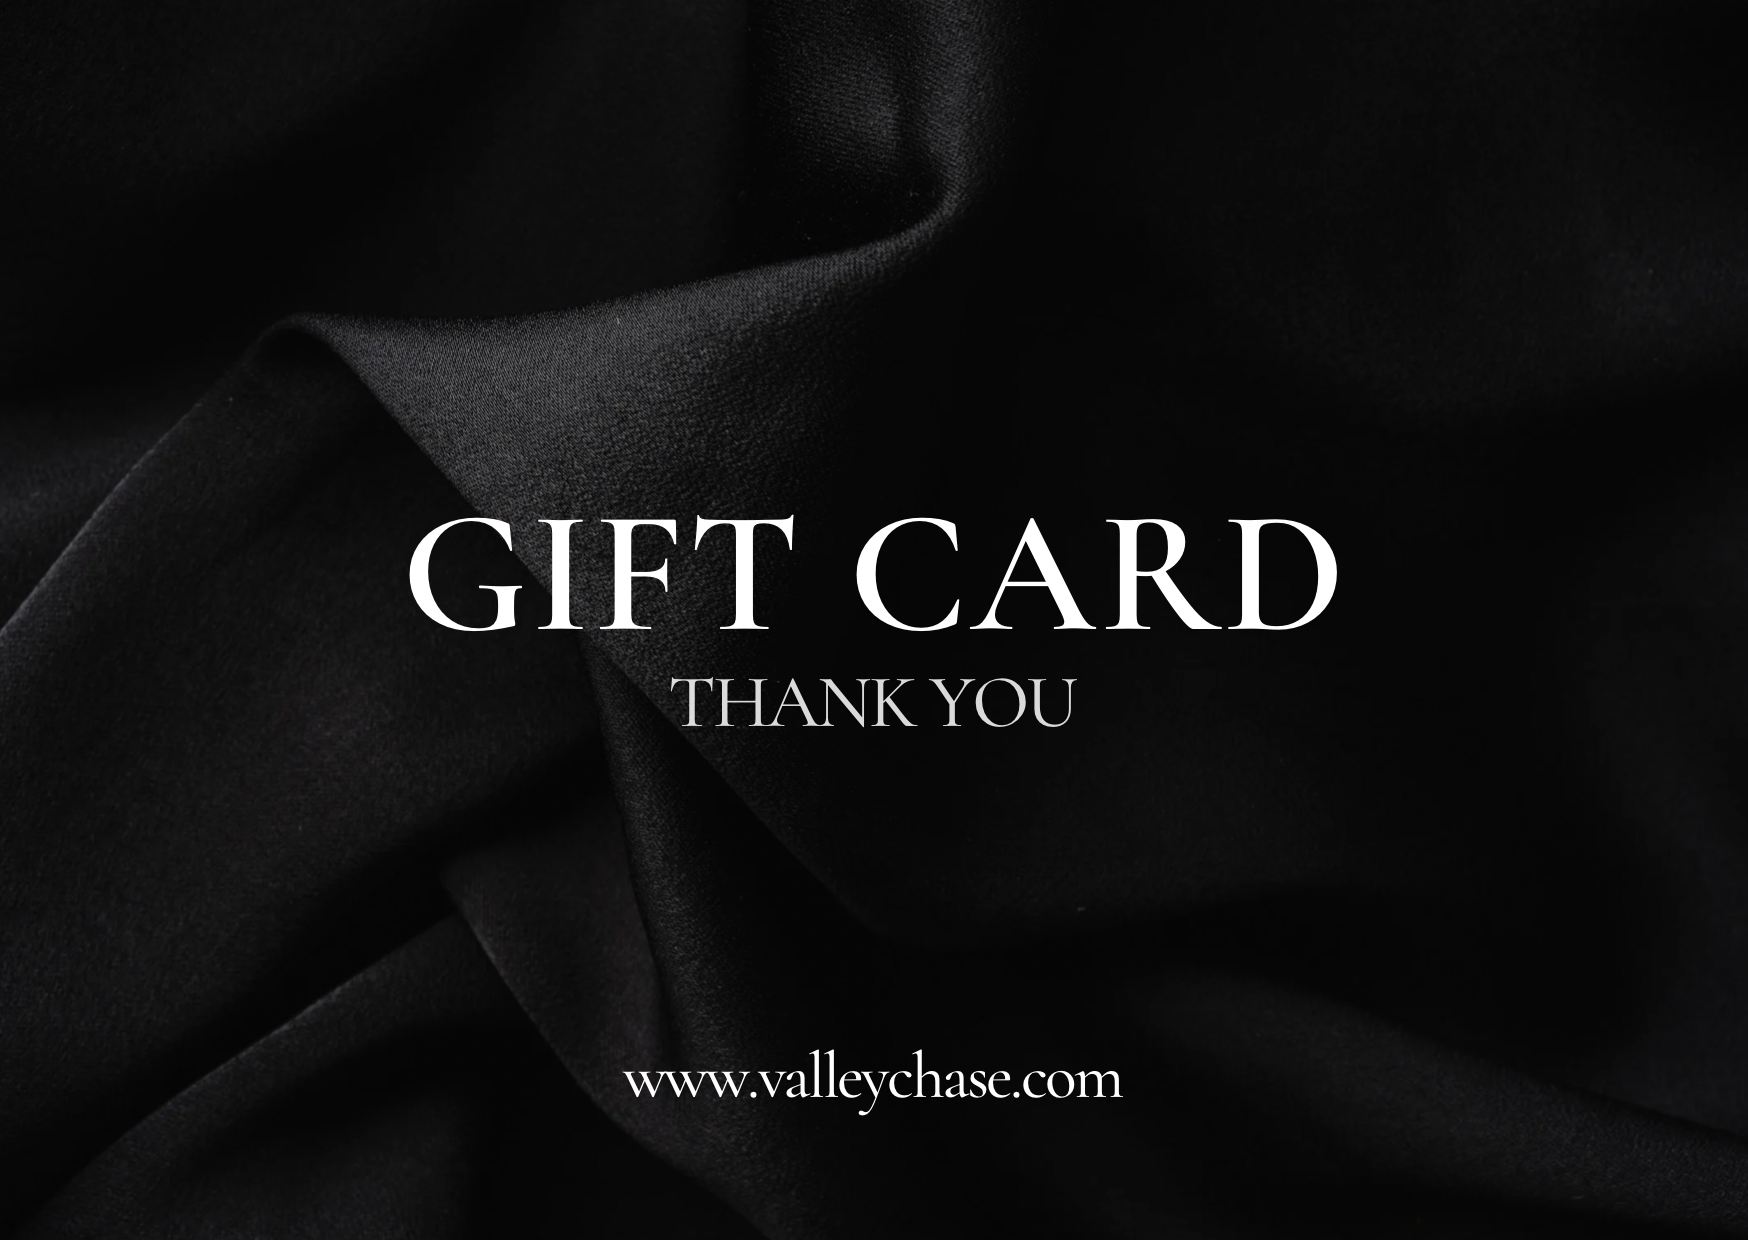 VALLEY CHASE - GIFT CARDS